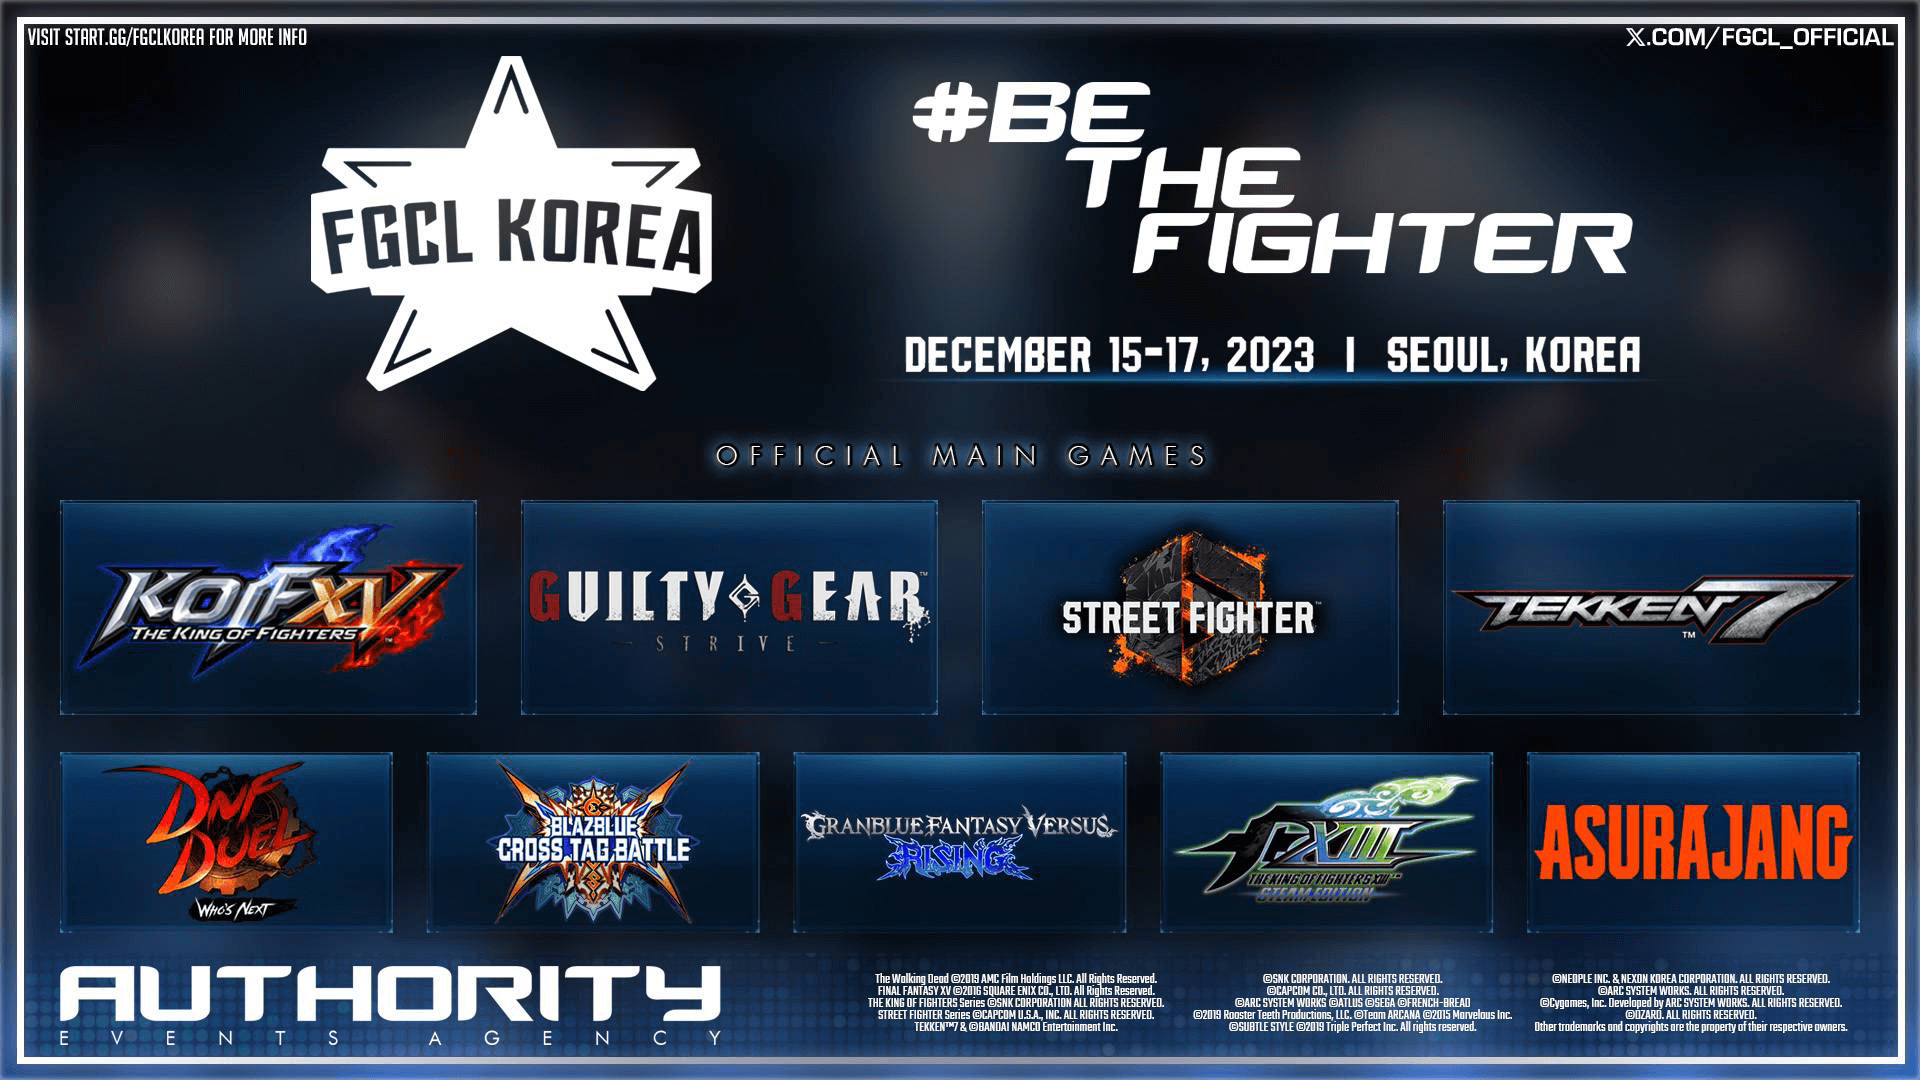 FGCL Korea 2023: Games and Stream Schedule